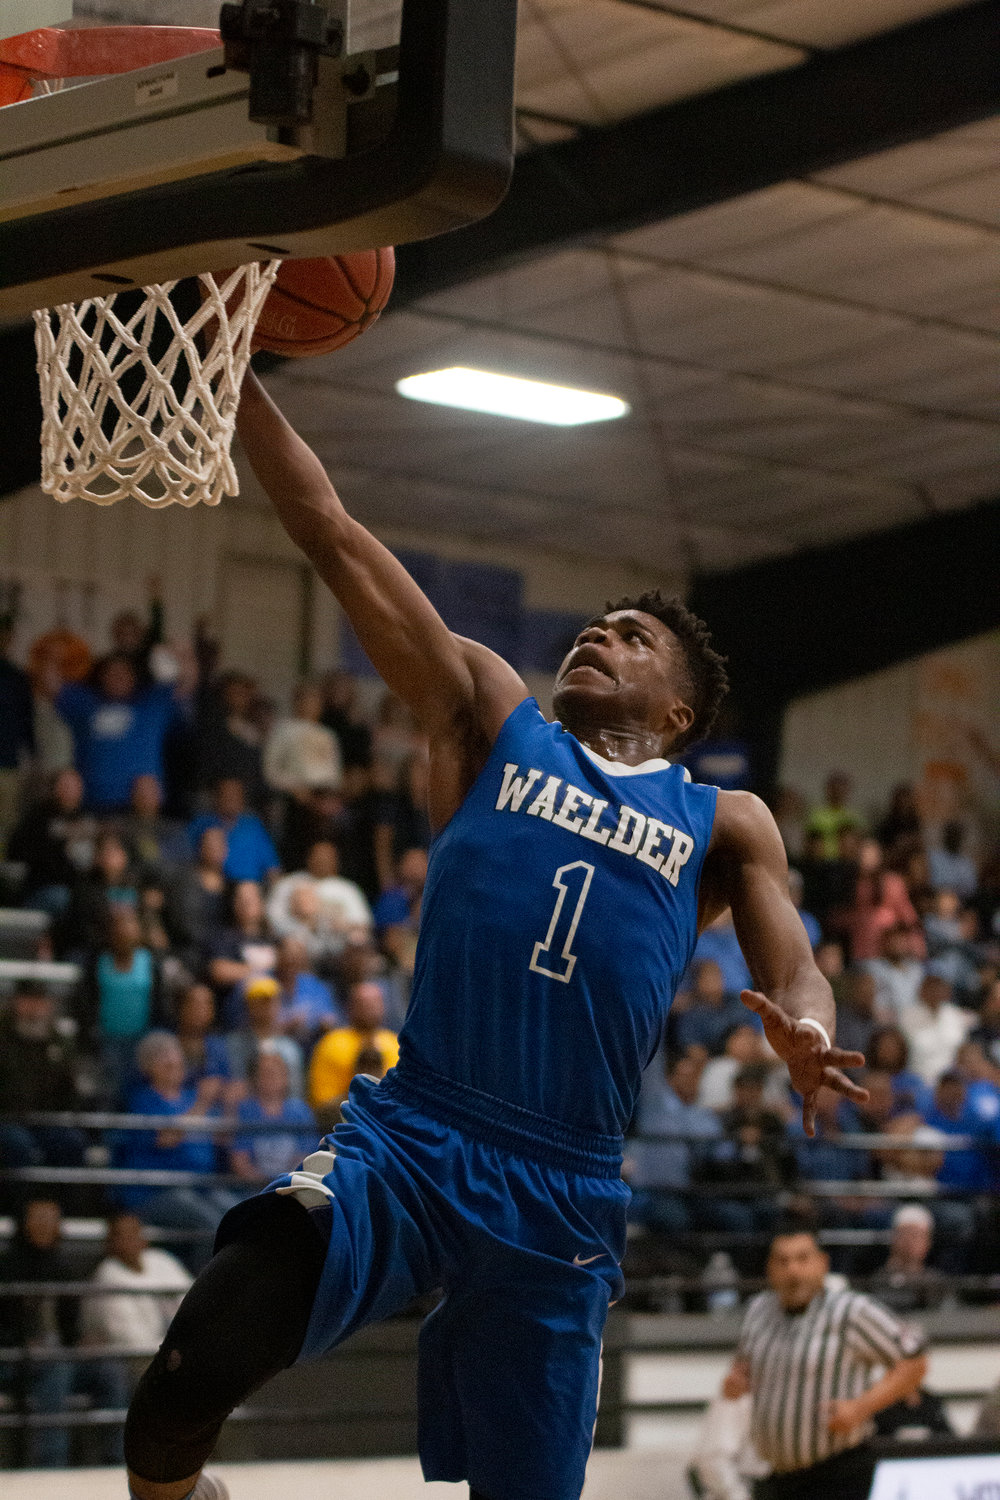 Isaiah Miller (1) finishes a fast break with a dunk in Waelder’s 61-43 win over Moulton on Tuesday. The Wildcats are now 9-0 in District 30-1A.